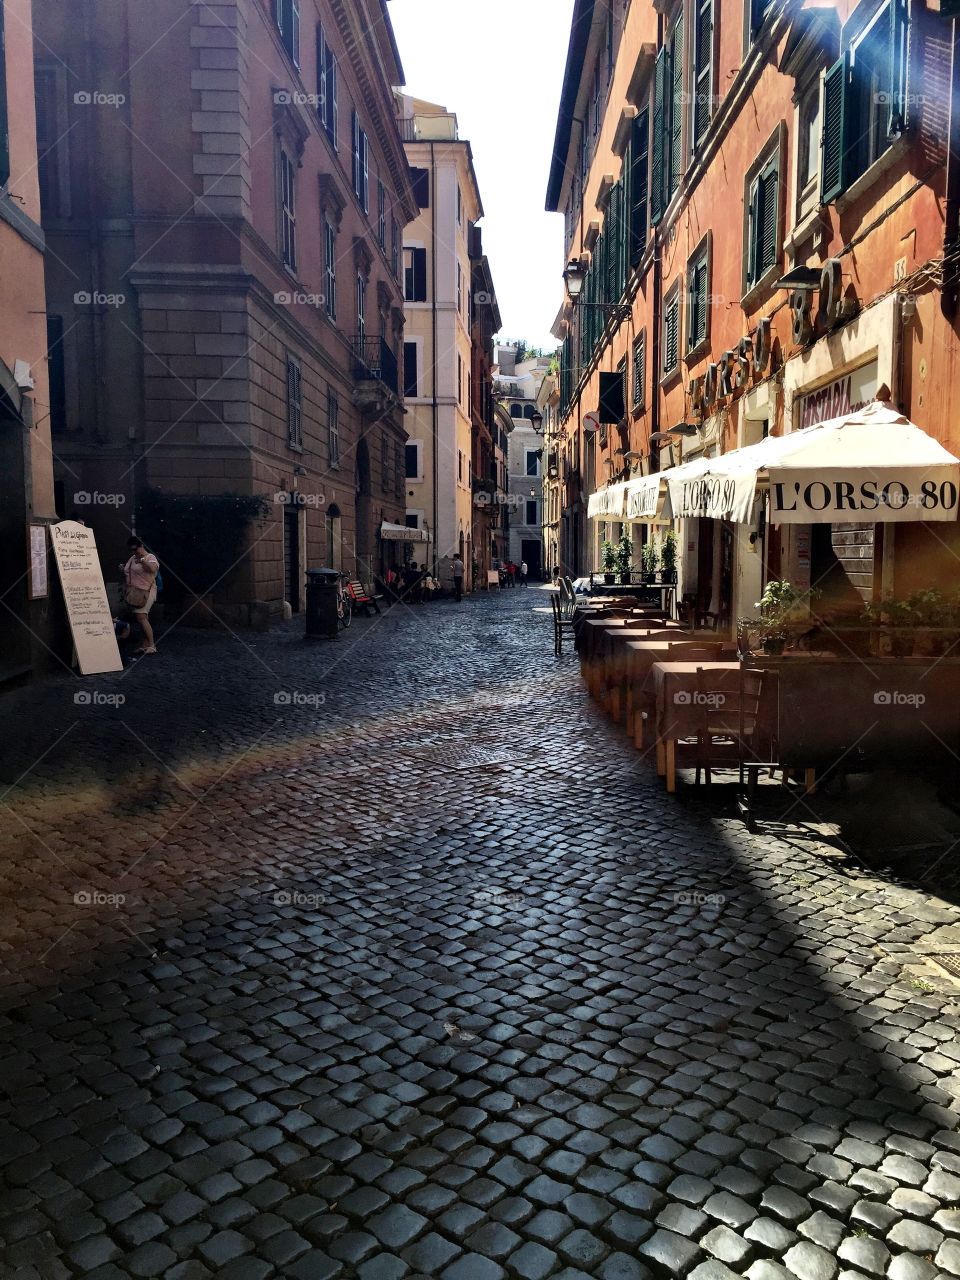 Midday summer in Rome with sweat trickling down our necks as we saunter through the heat but when we take a look up from our poor salty feet below there is true beauty all around us in the cobblestone road to the alley way lined with apartments and small business. 